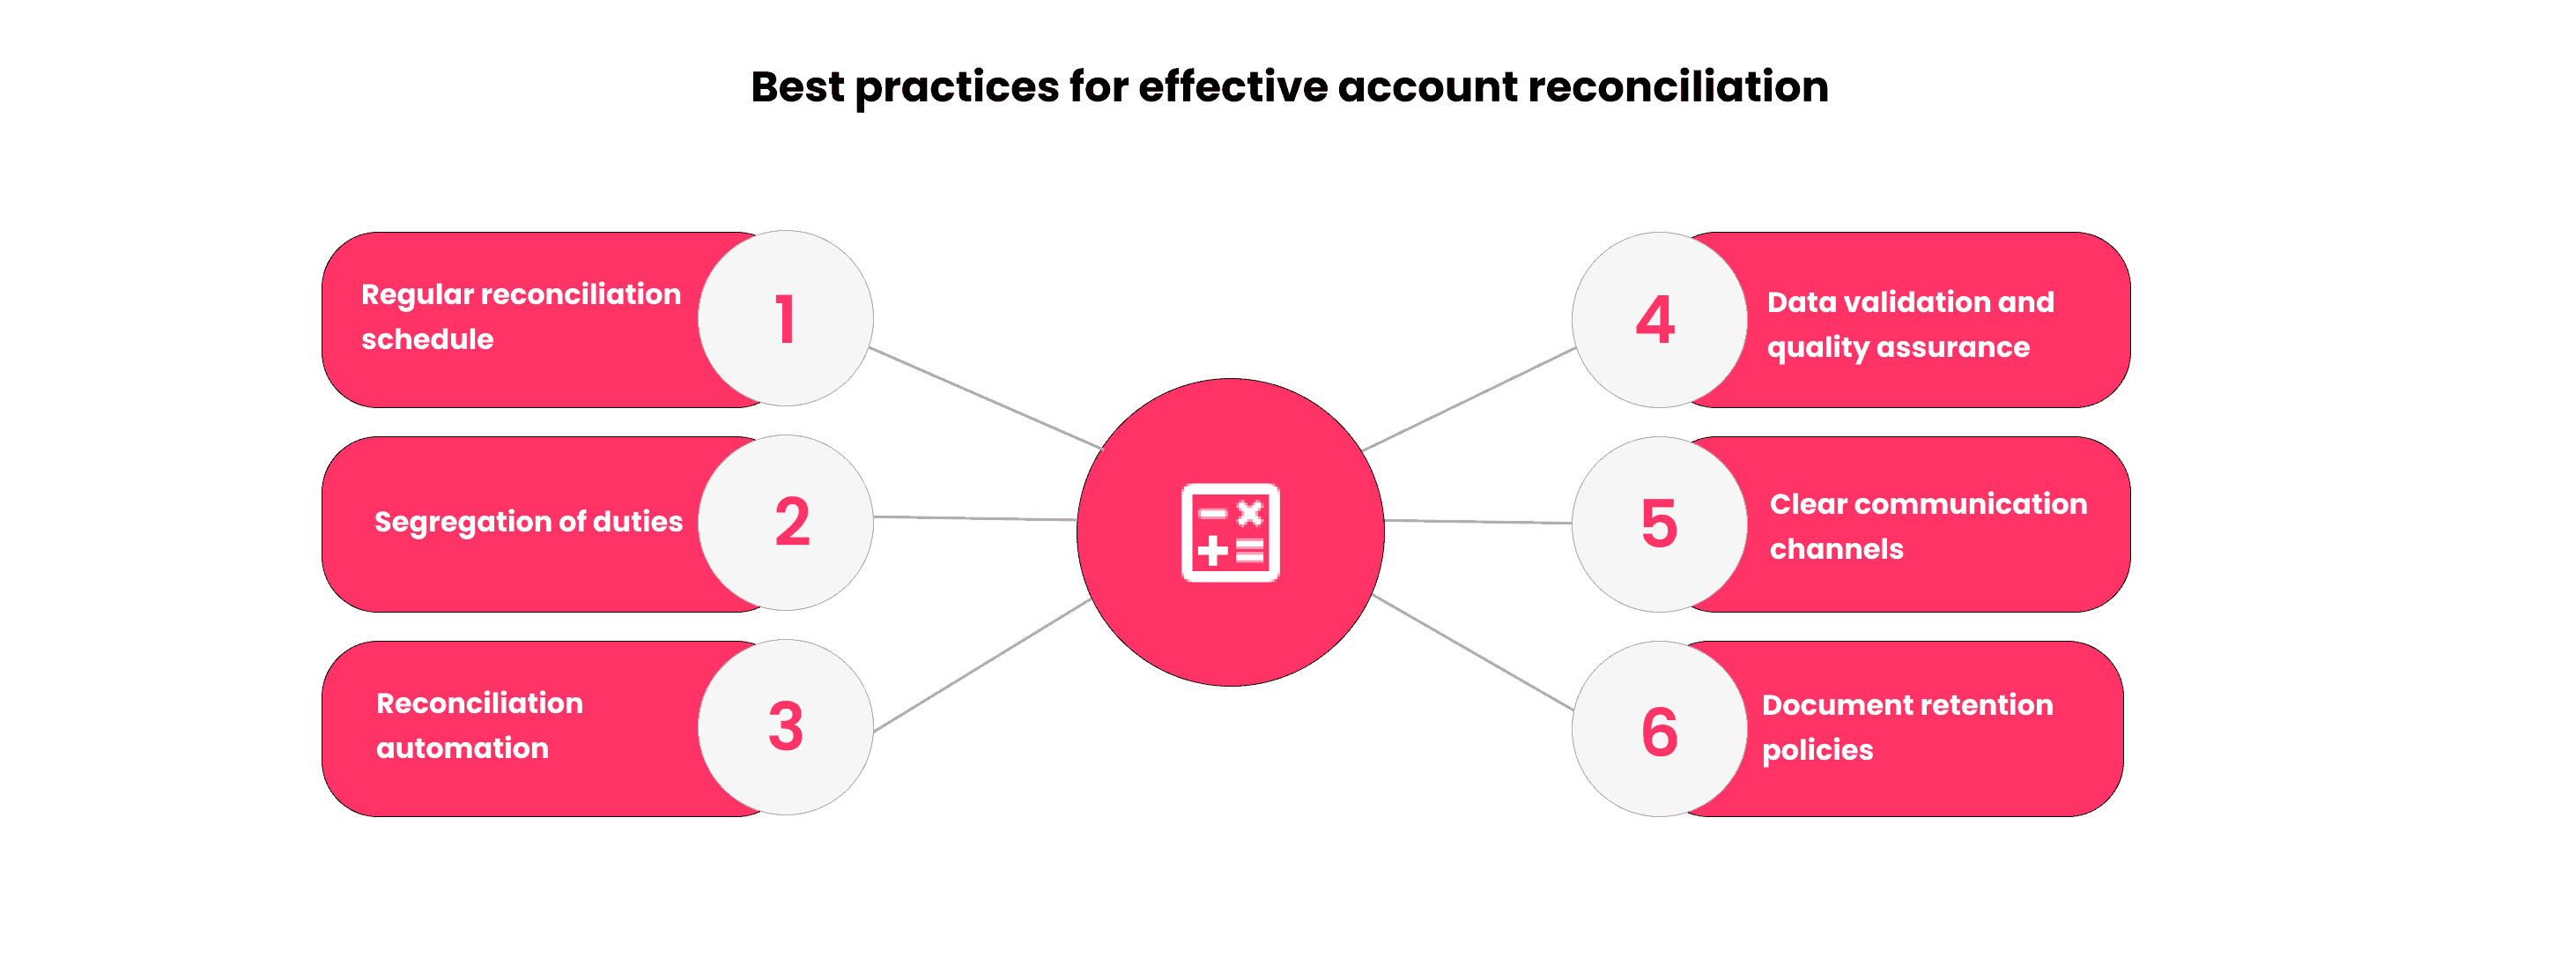 Best practices for account reconciliation